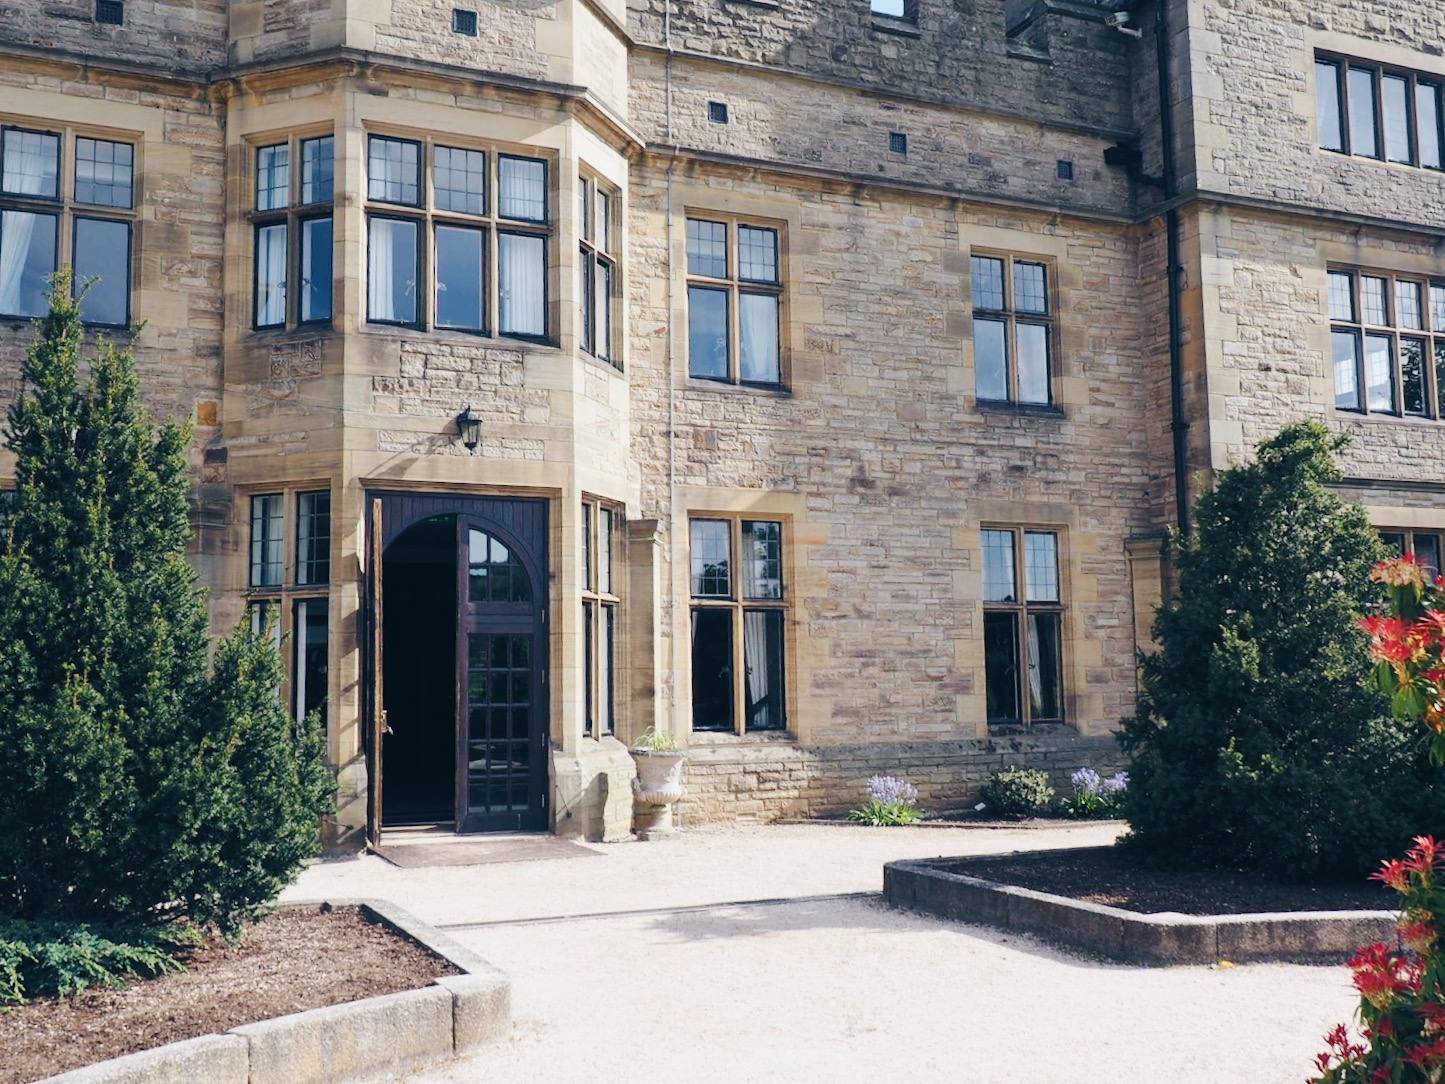 Slaley Hall Hotel review